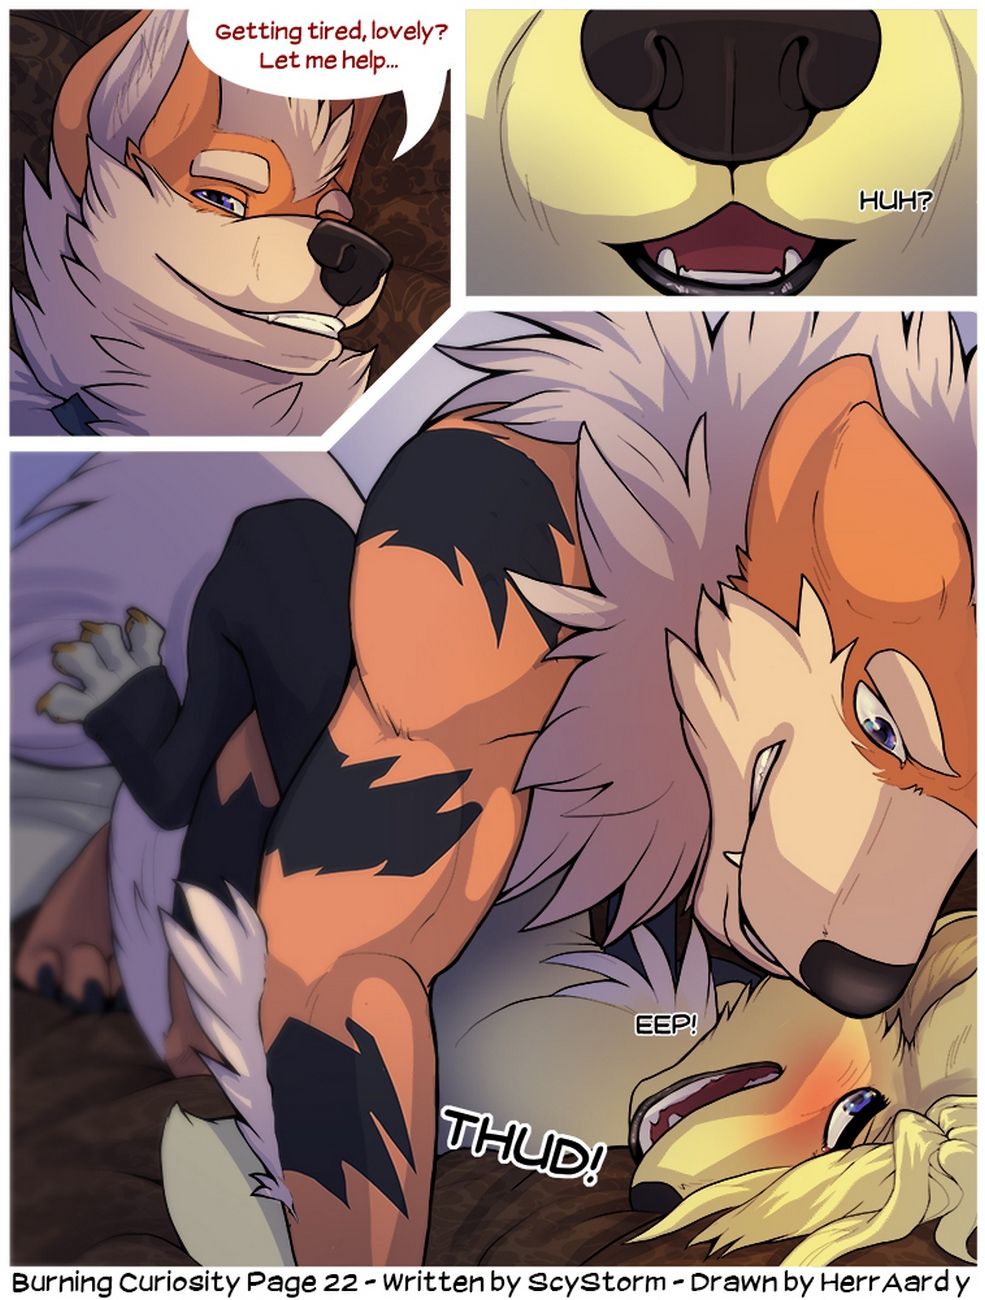 Burning Curiosity - part 2 page 1